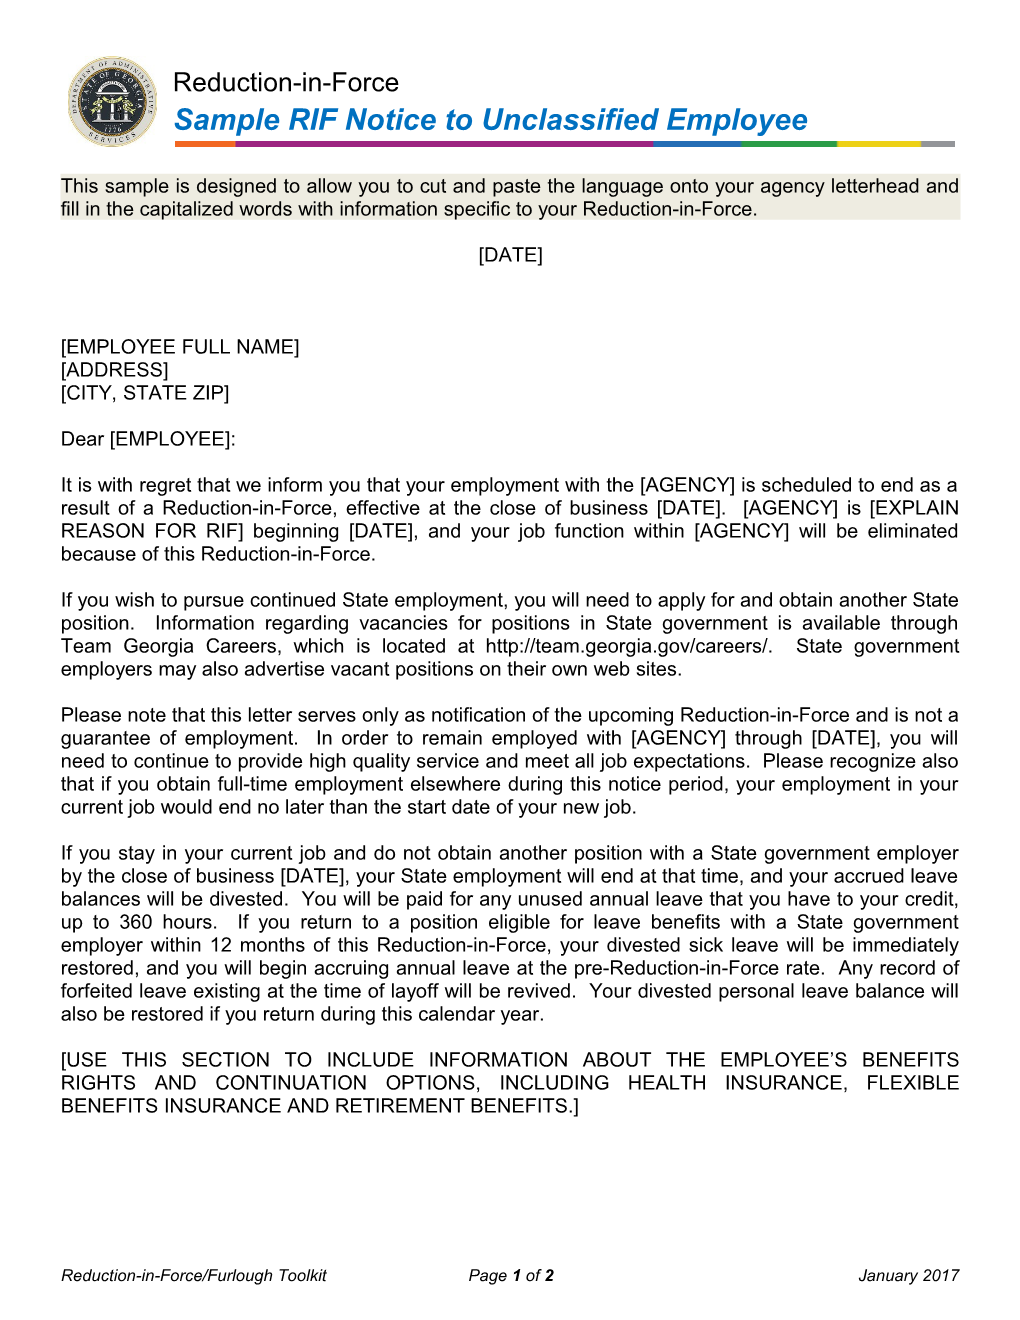 Sample RIF Notice Letter for Unclassified Employees